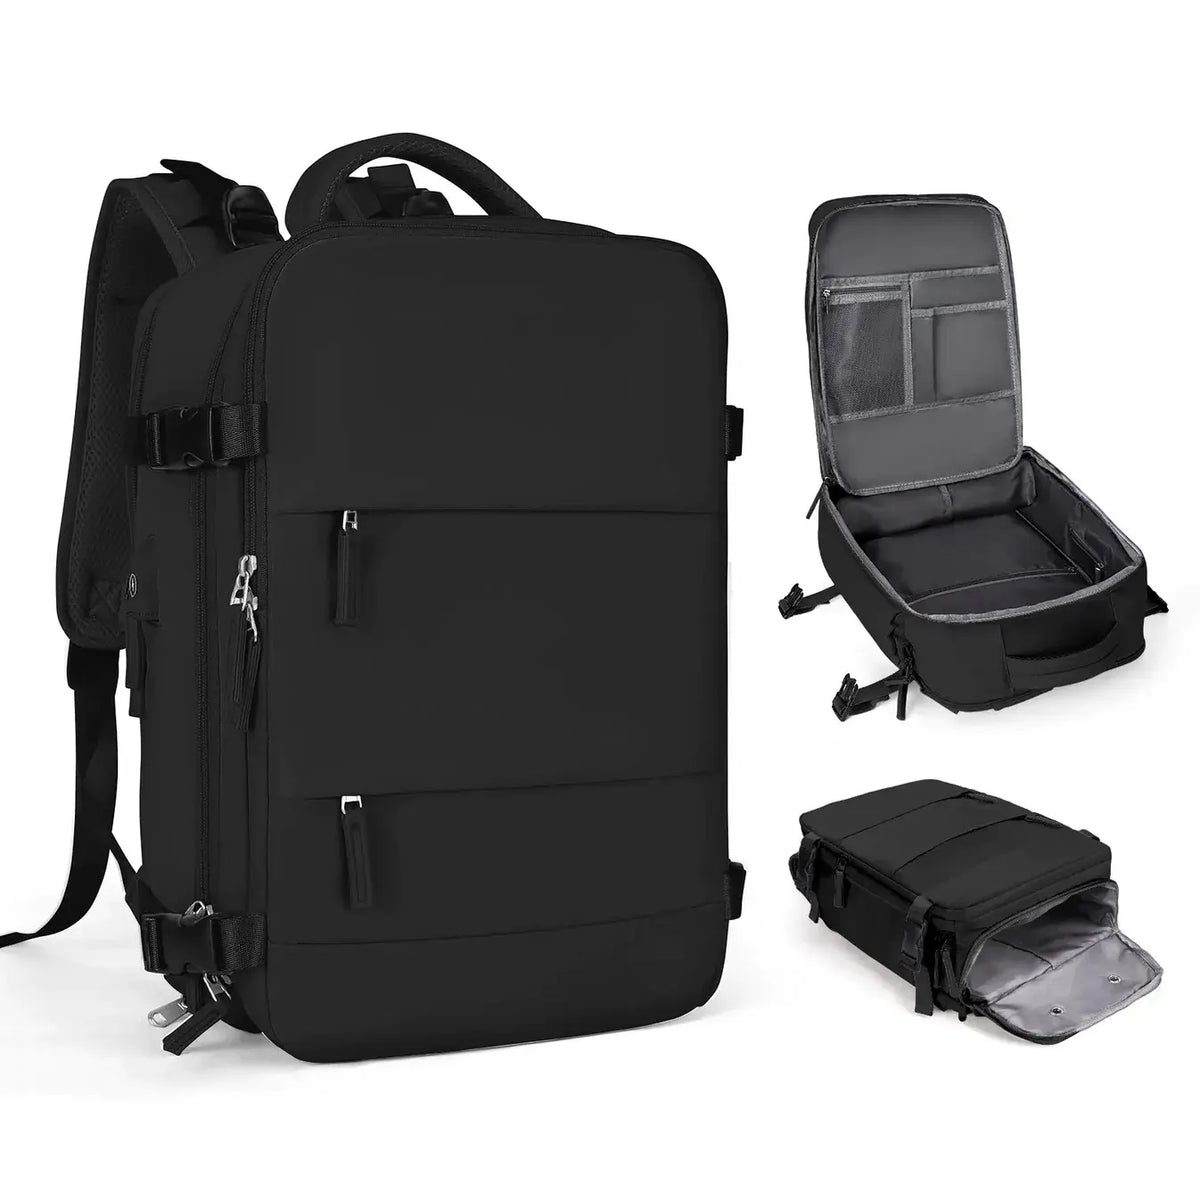 SkyRider Travel Backpack in black, showing compartment details